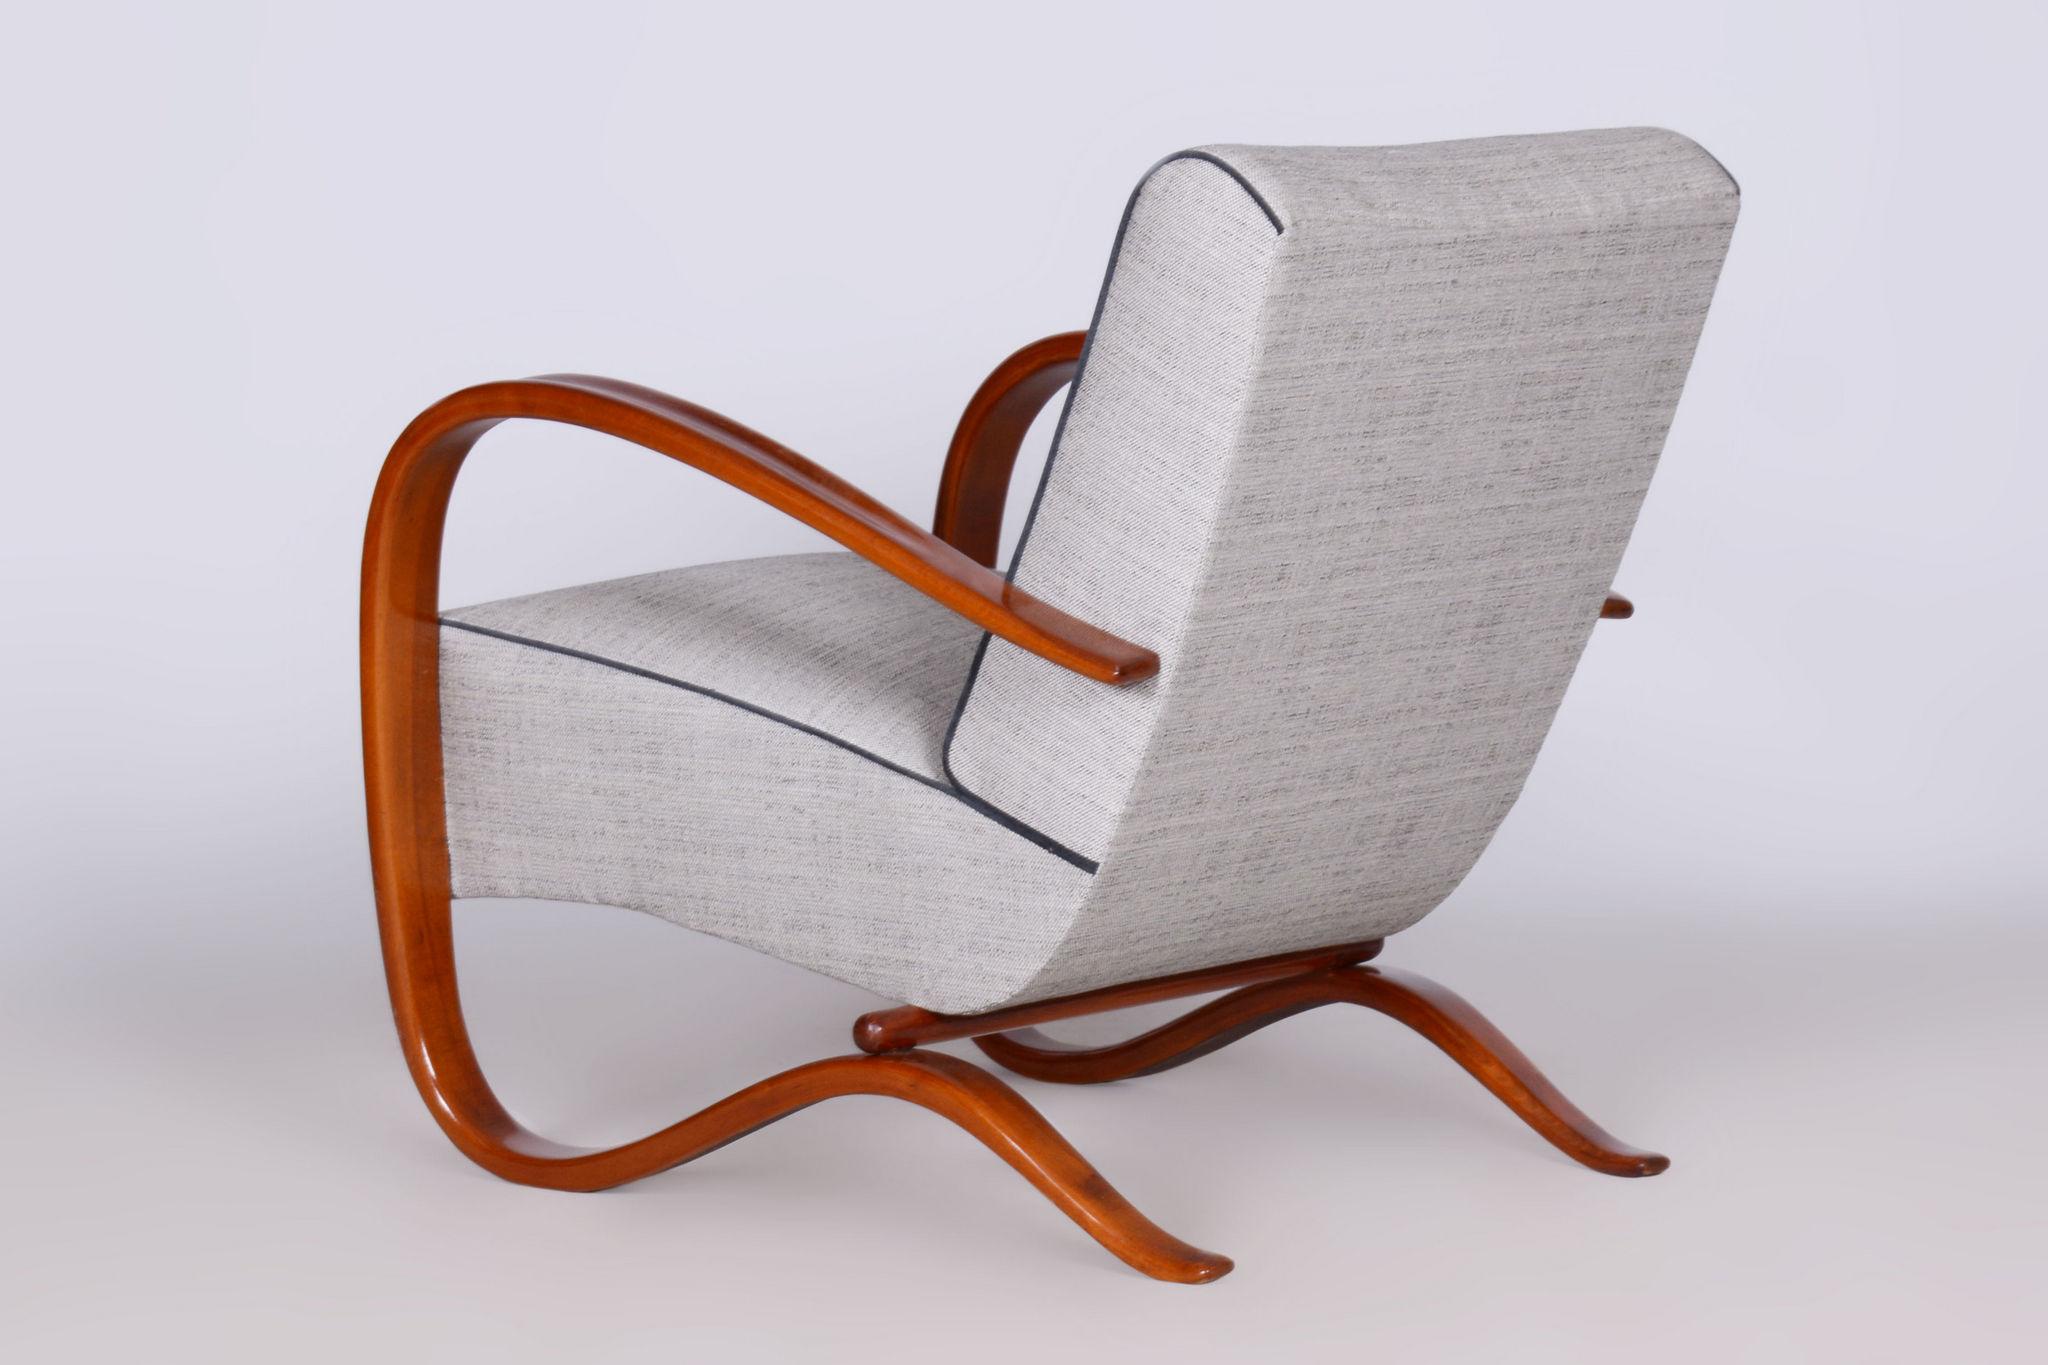 Pair of Restored H-269 Armchairs, by Jindrich Halabala, UP Zavody, Czech, 1930s For Sale 2